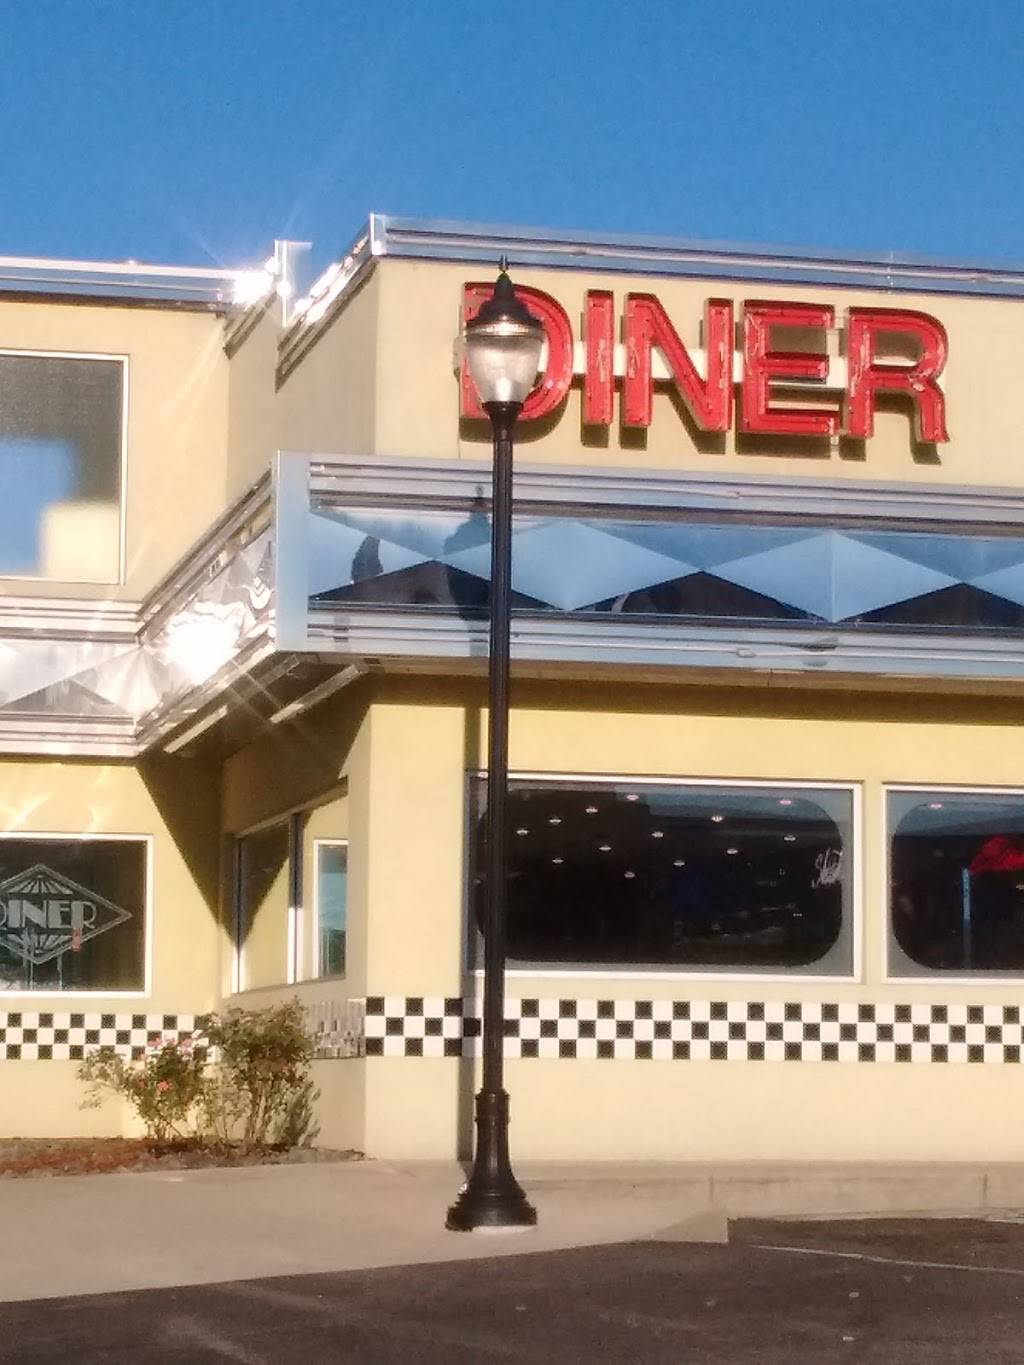 Diner | restaurant | 492 17963, 496 Suedberg Rd, Pine Grove, PA 17963, USA | 5703458800 OR +1 570-345-8800